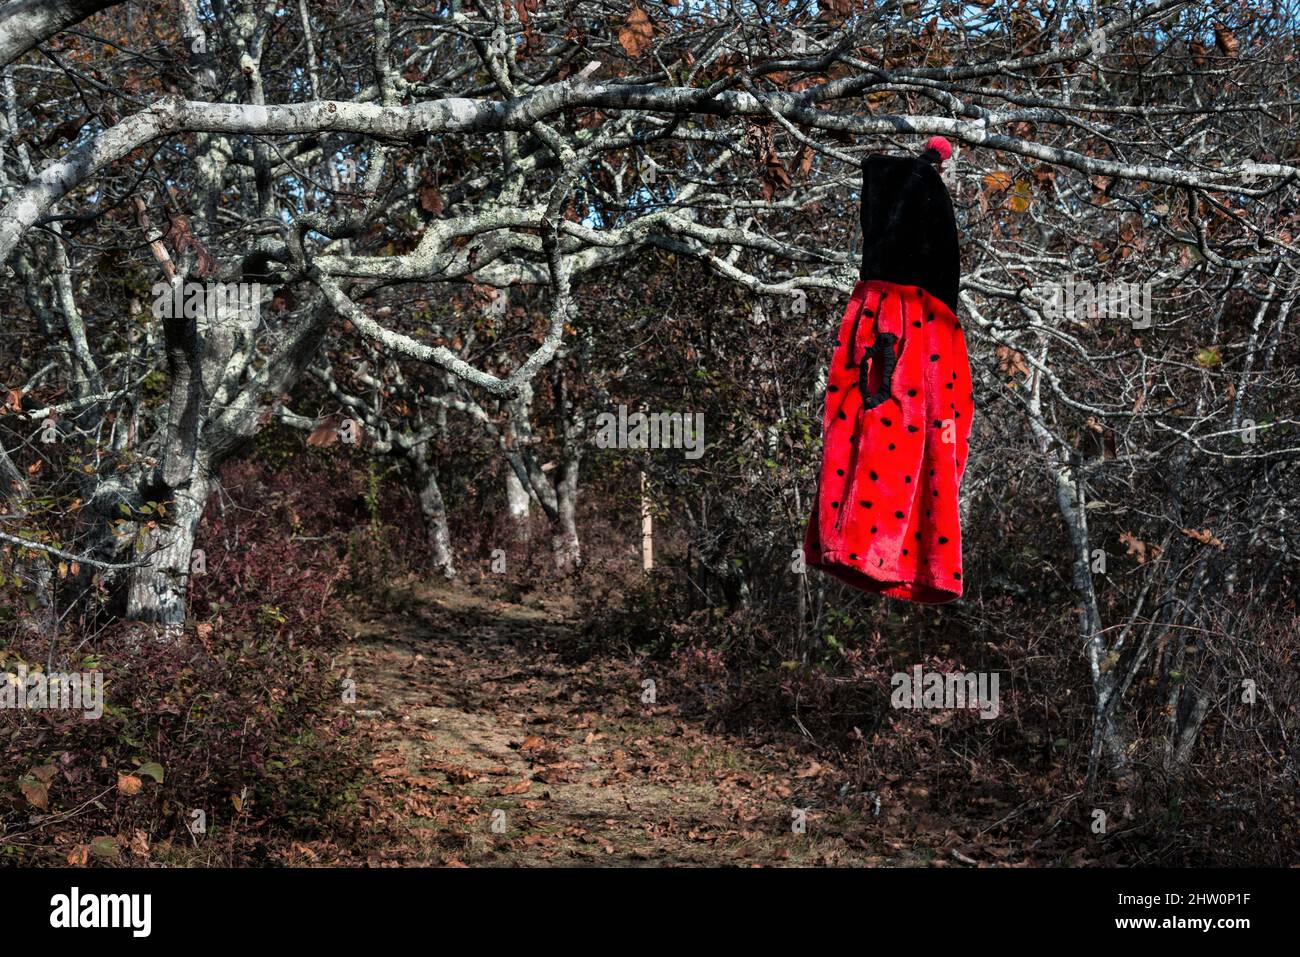 Girls coat hangs from a tree along a remote path. Stock Photo